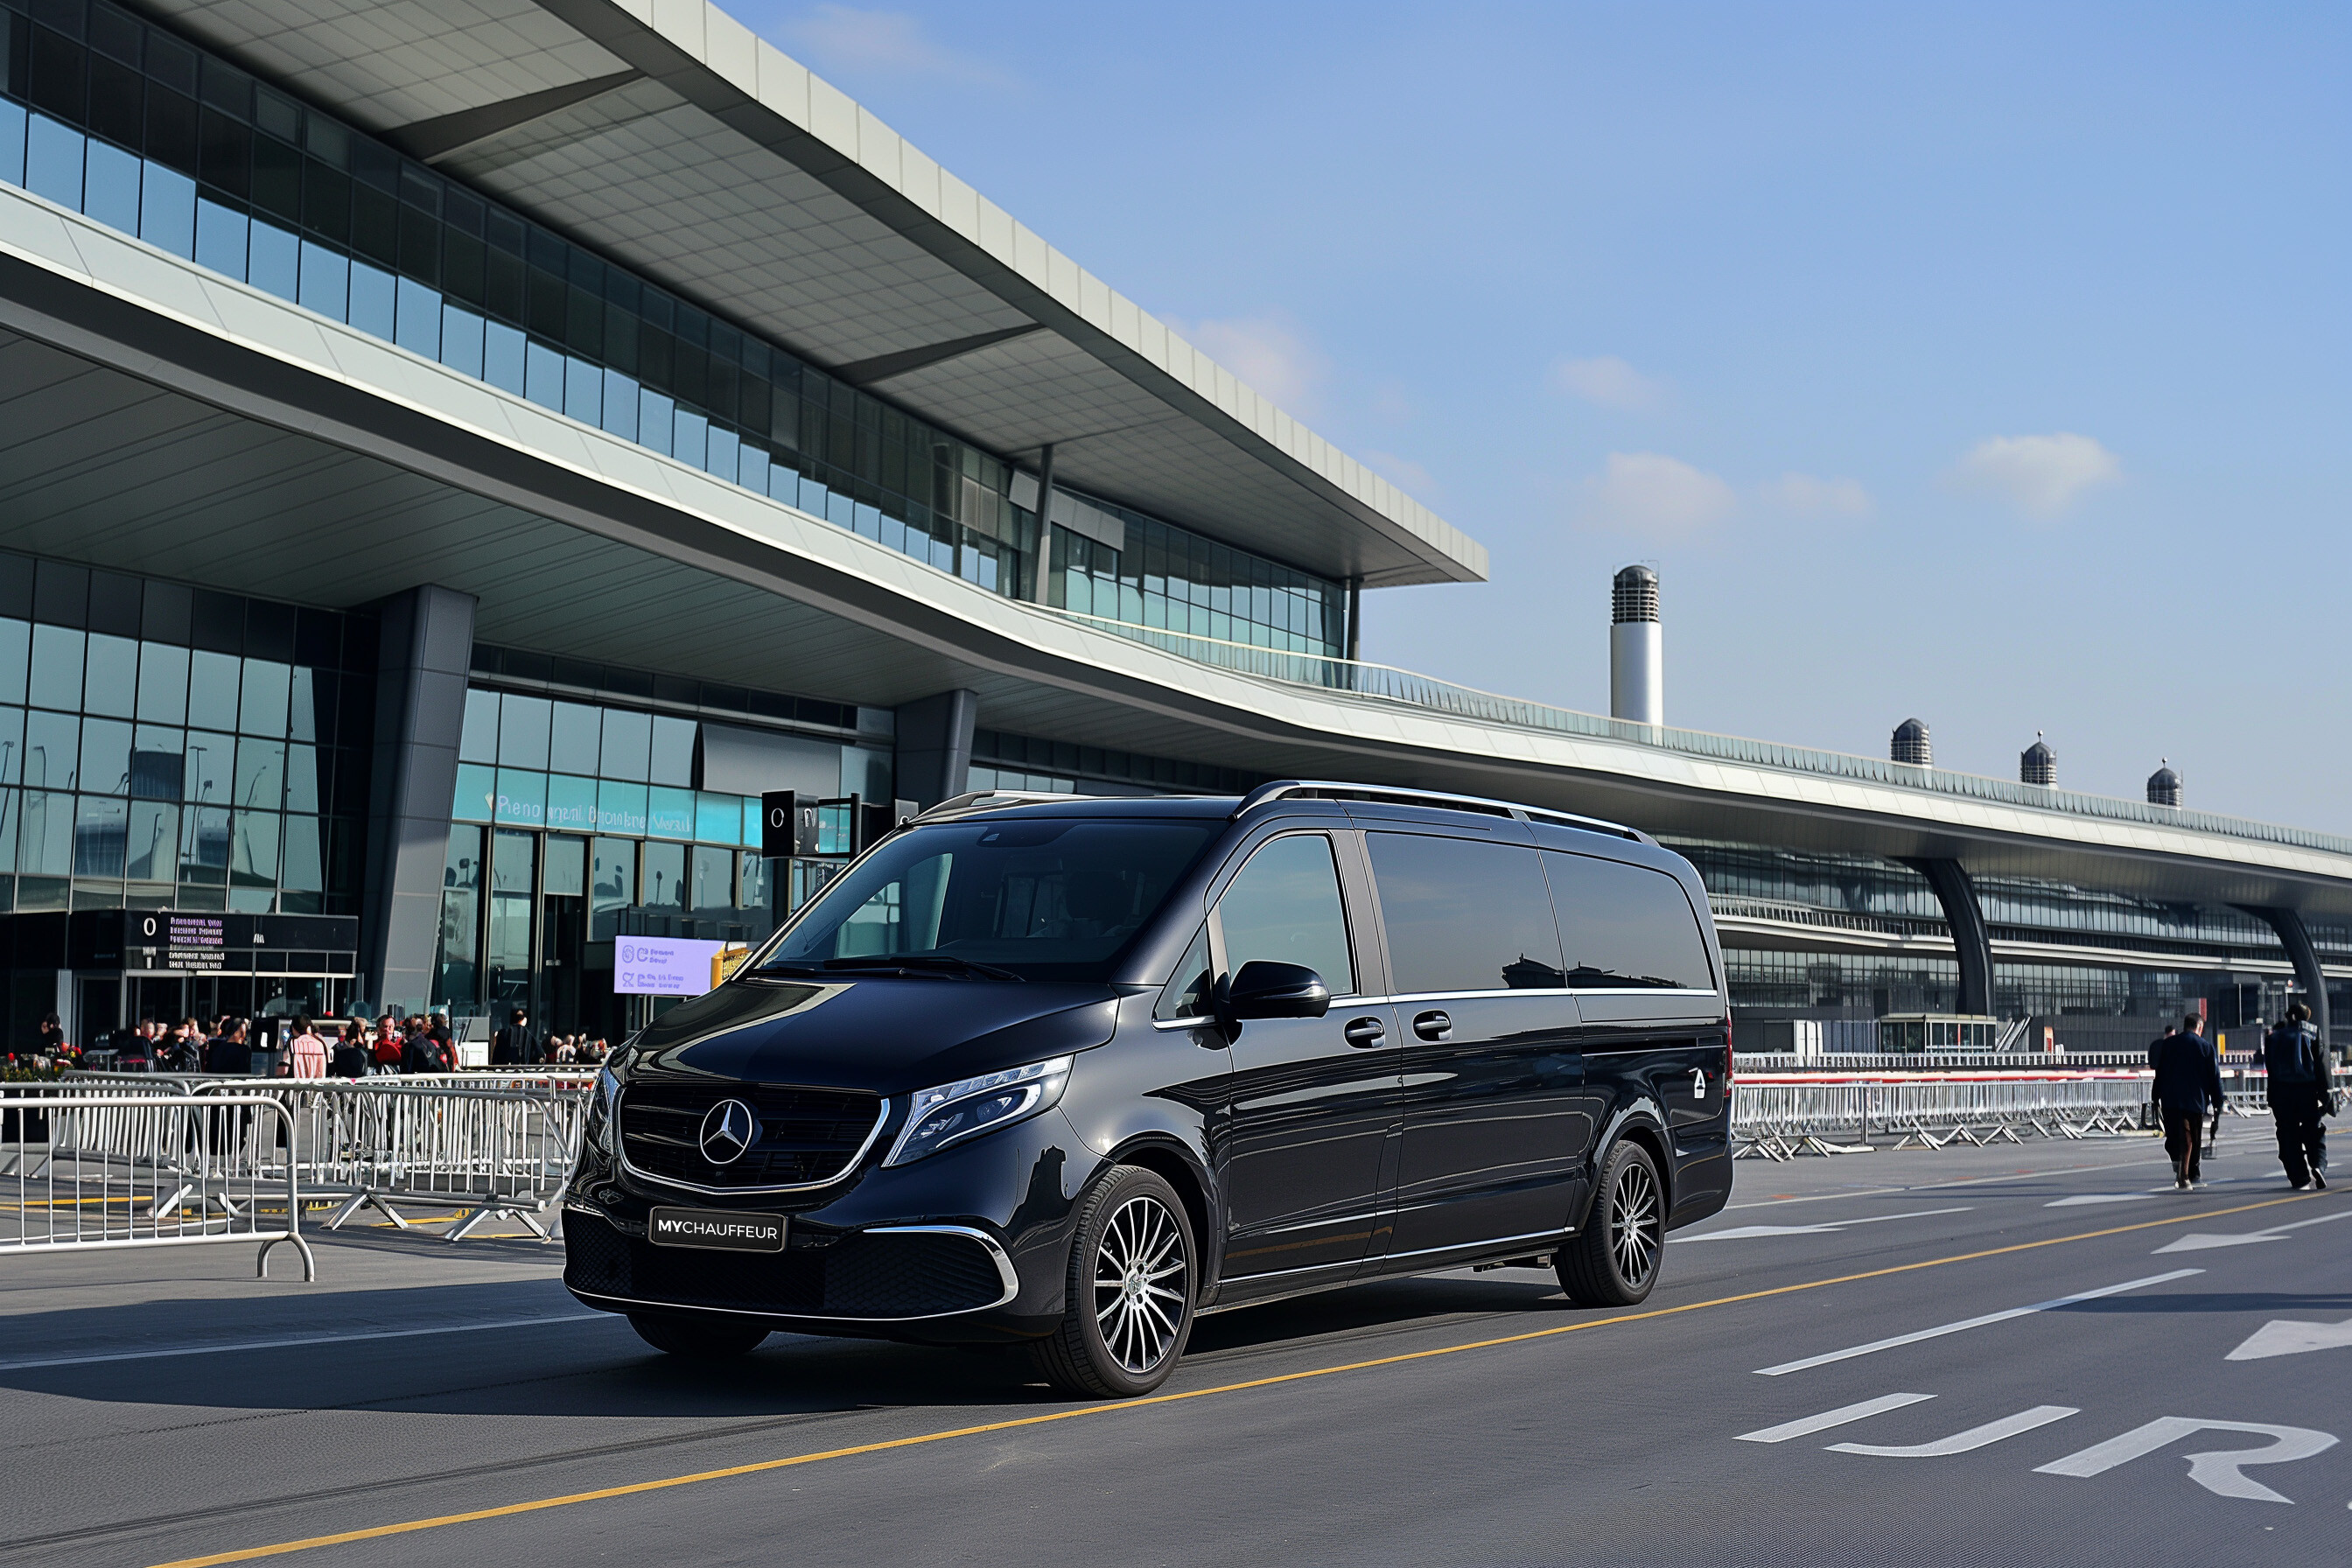 Airport shuttle Istanbul - With a first-class luxury Maybach limousine